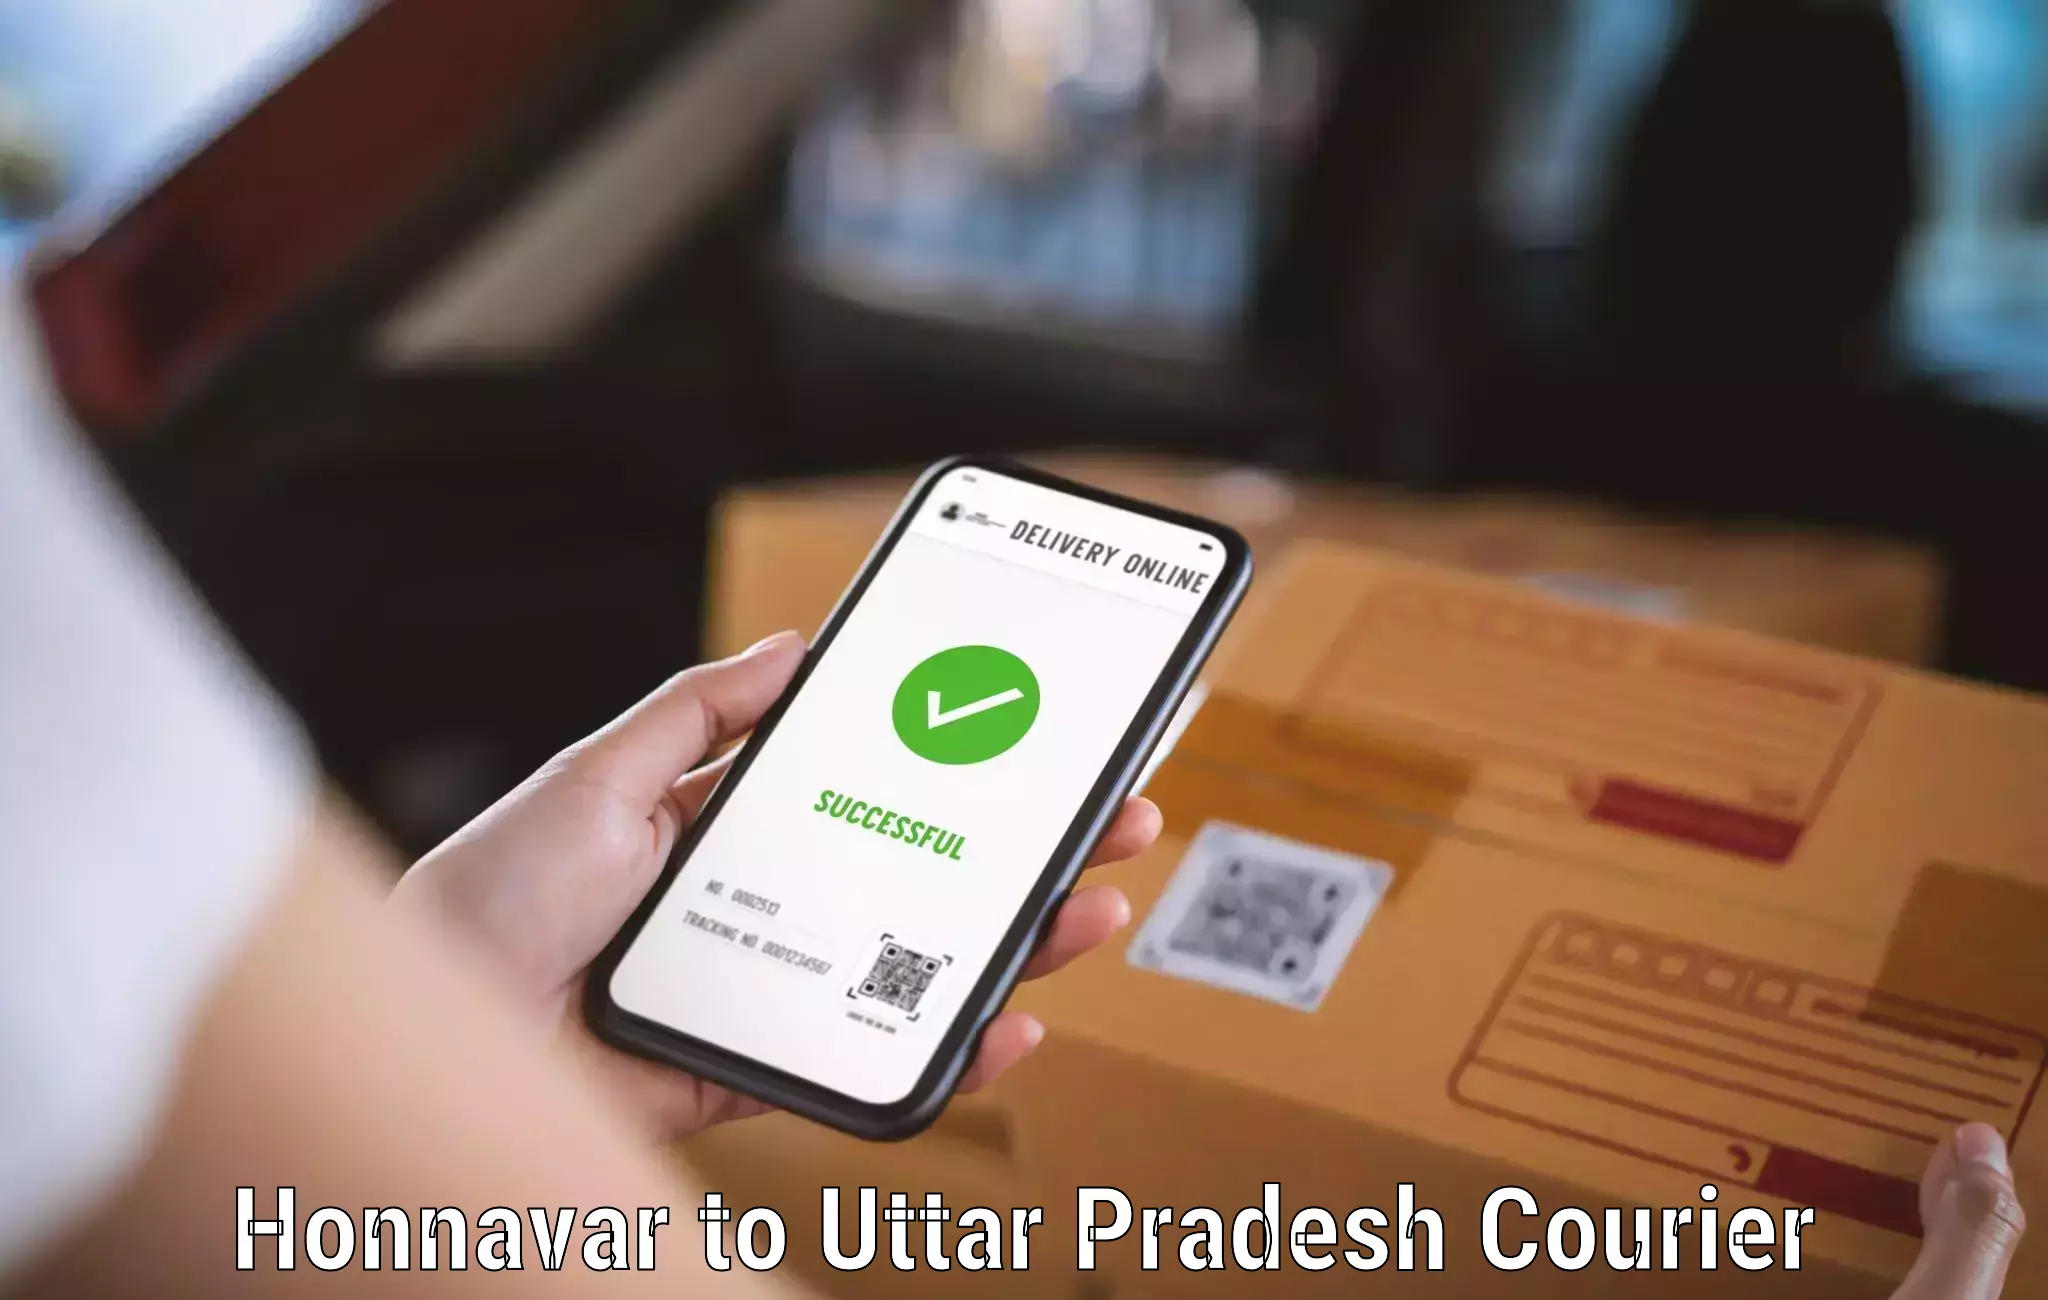 State-of-the-art courier technology Honnavar to Reoti